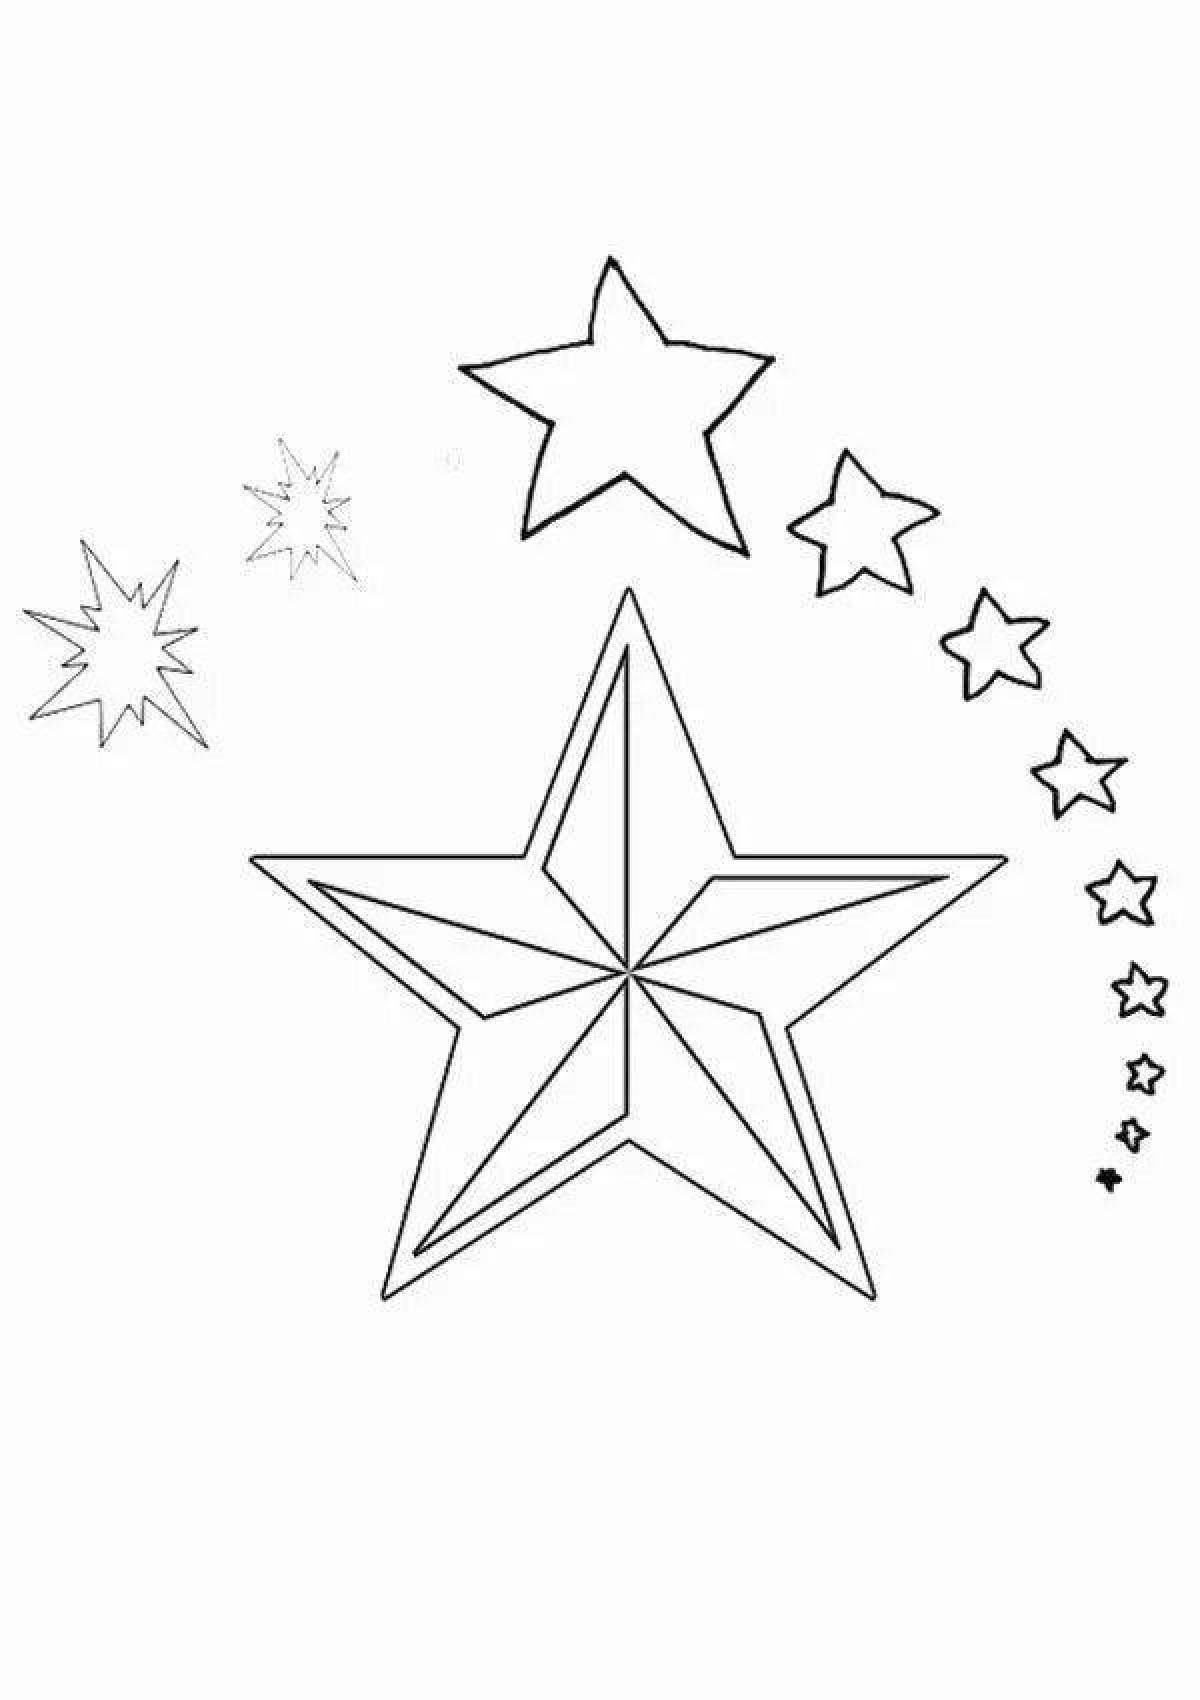 Exciting Christmas star coloring book